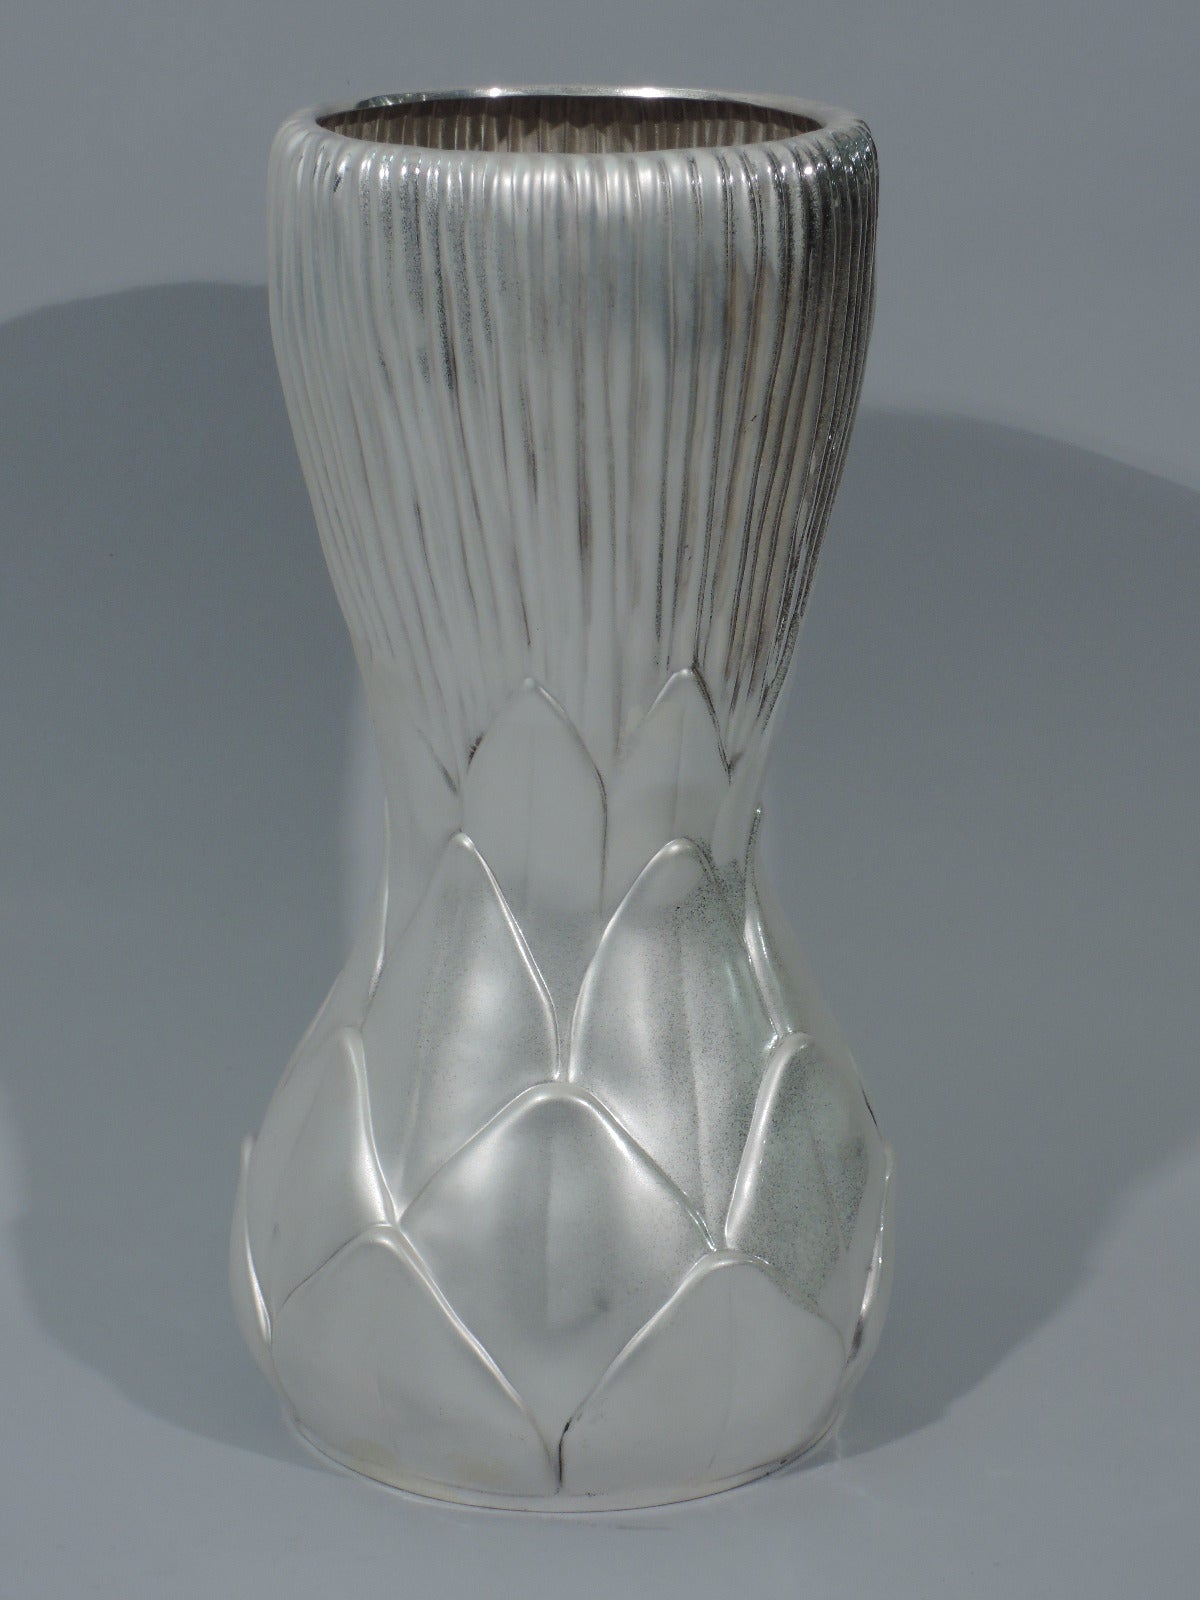 Aesthetic Movement Contemporary Tiffany Sterling Silver Vase of Aesthetic Inspiration